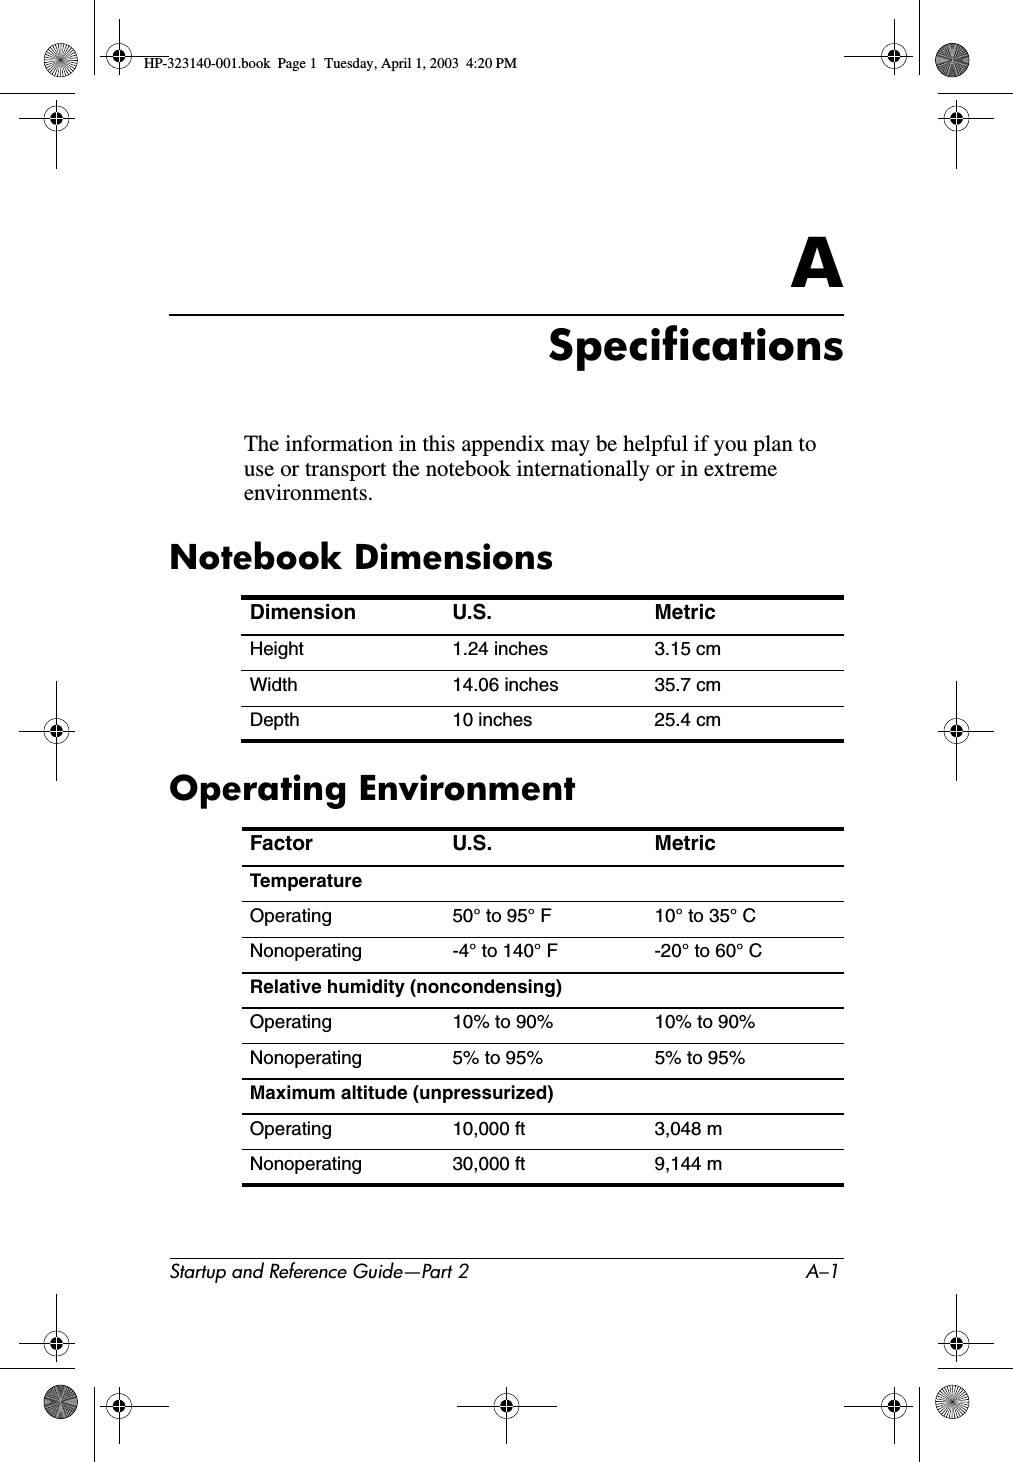 Startup and Reference Guide—Part 2 A–1ASpecificationsThe information in this appendix may be helpful if you plan to use or transport the notebook internationally or in extreme environments.Notebook DimensionsOperating EnvironmentDimension U.S. MetricHeight 1.24 inches 3.15 cmWidth 14.06 inches 35.7 cmDepth 10 inches 25.4 cmFactor U.S. MetricTemperatureOperating 50° to 95° F 10° to 35° CNonoperating -4° to 140° F -20° to 60° CRelative humidity (noncondensing)Operating 10% to 90% 10% to 90%Nonoperating 5% to 95% 5% to 95%Maximum altitude (unpressurized)Operating 10,000 ft 3,048 mNonoperating 30,000 ft 9,144 mHP-323140-001.book  Page 1  Tuesday, April 1, 2003  4:20 PM